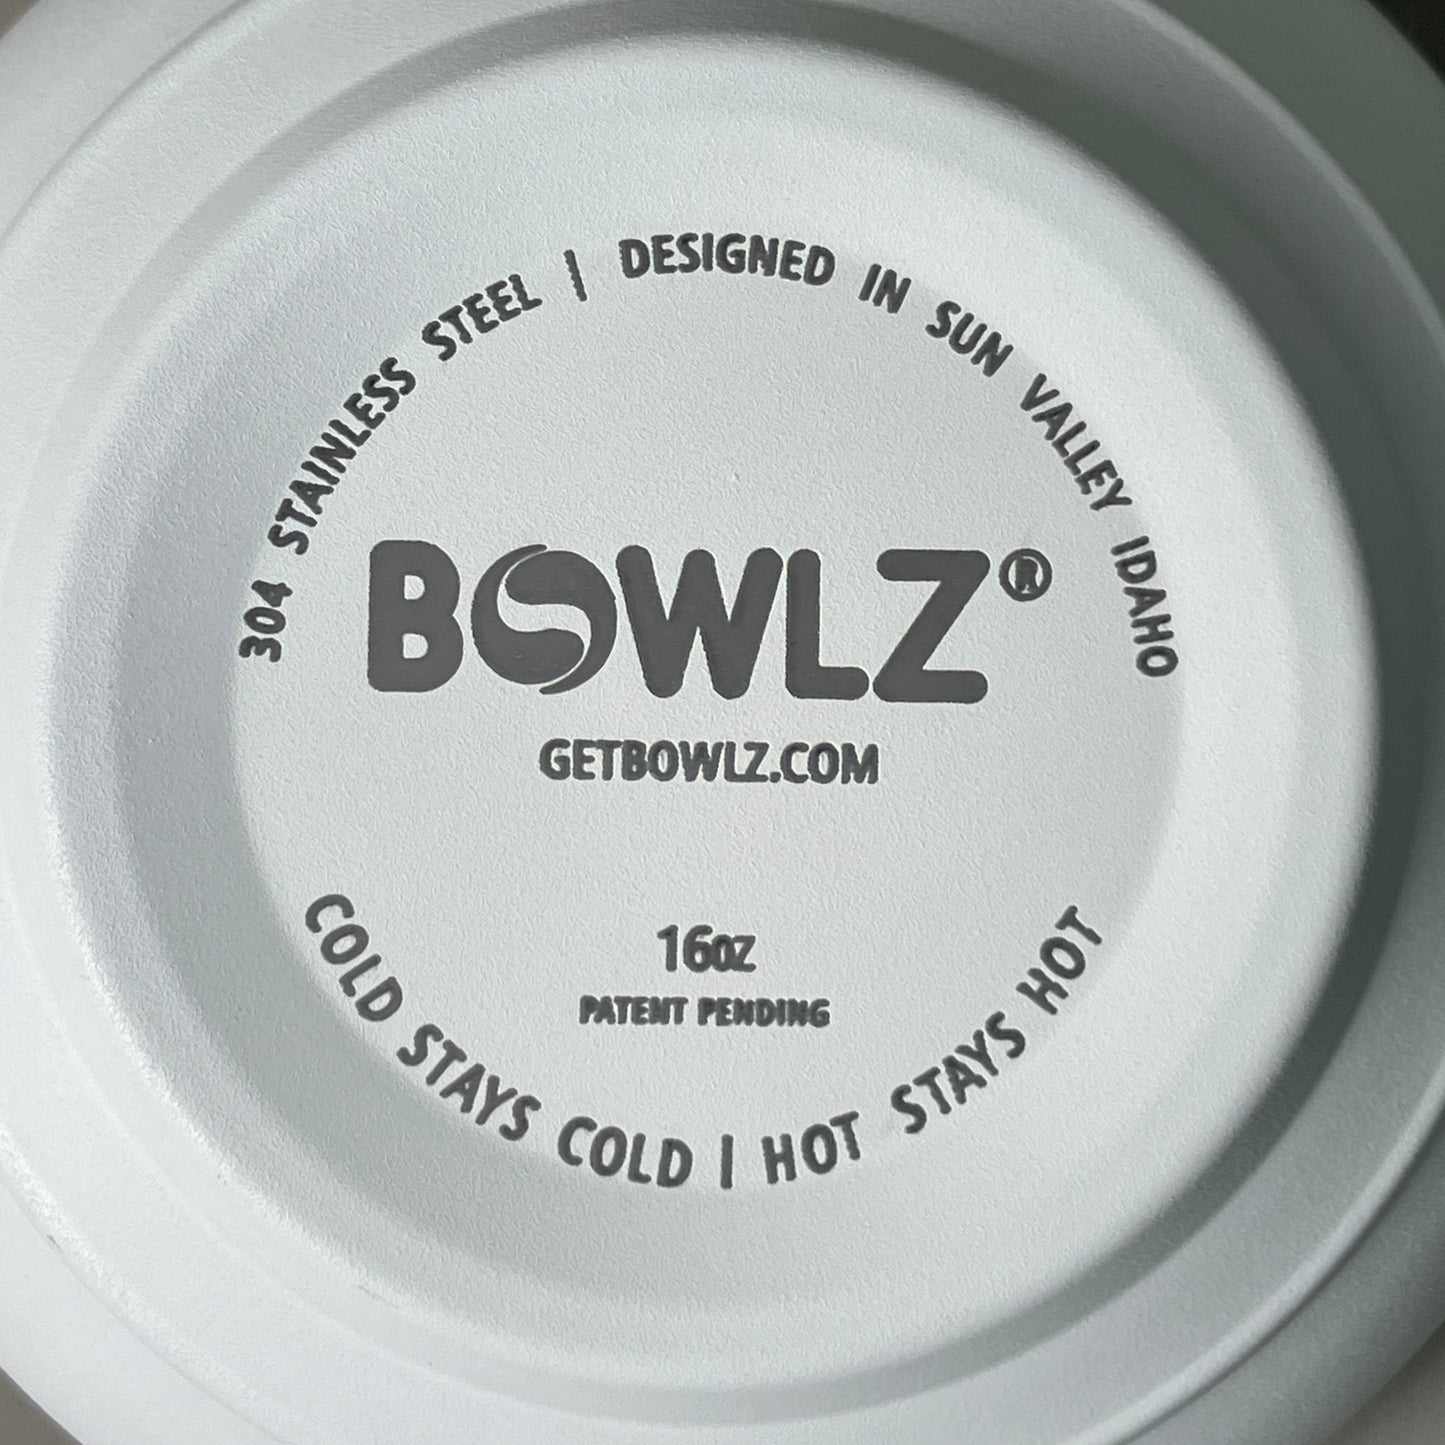 BOWLZ Stainless Steel Insulated Bowl 16 oz White (New) ~Keeps Ice Cream Cold!~